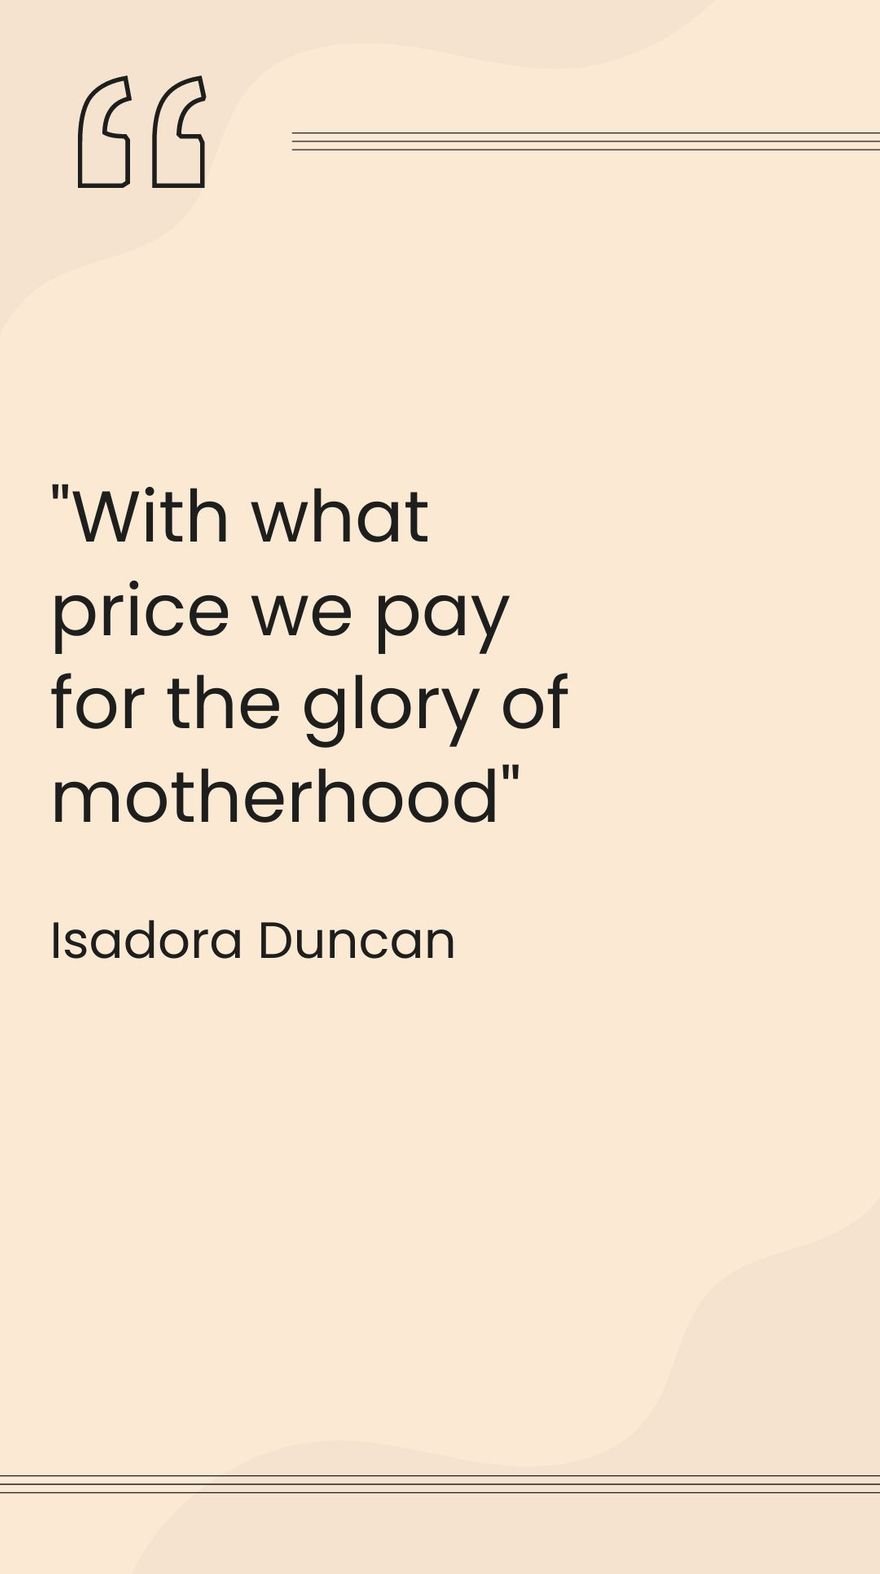 Free Isadora Duncan - With what price we pay for the glory of motherhood. 